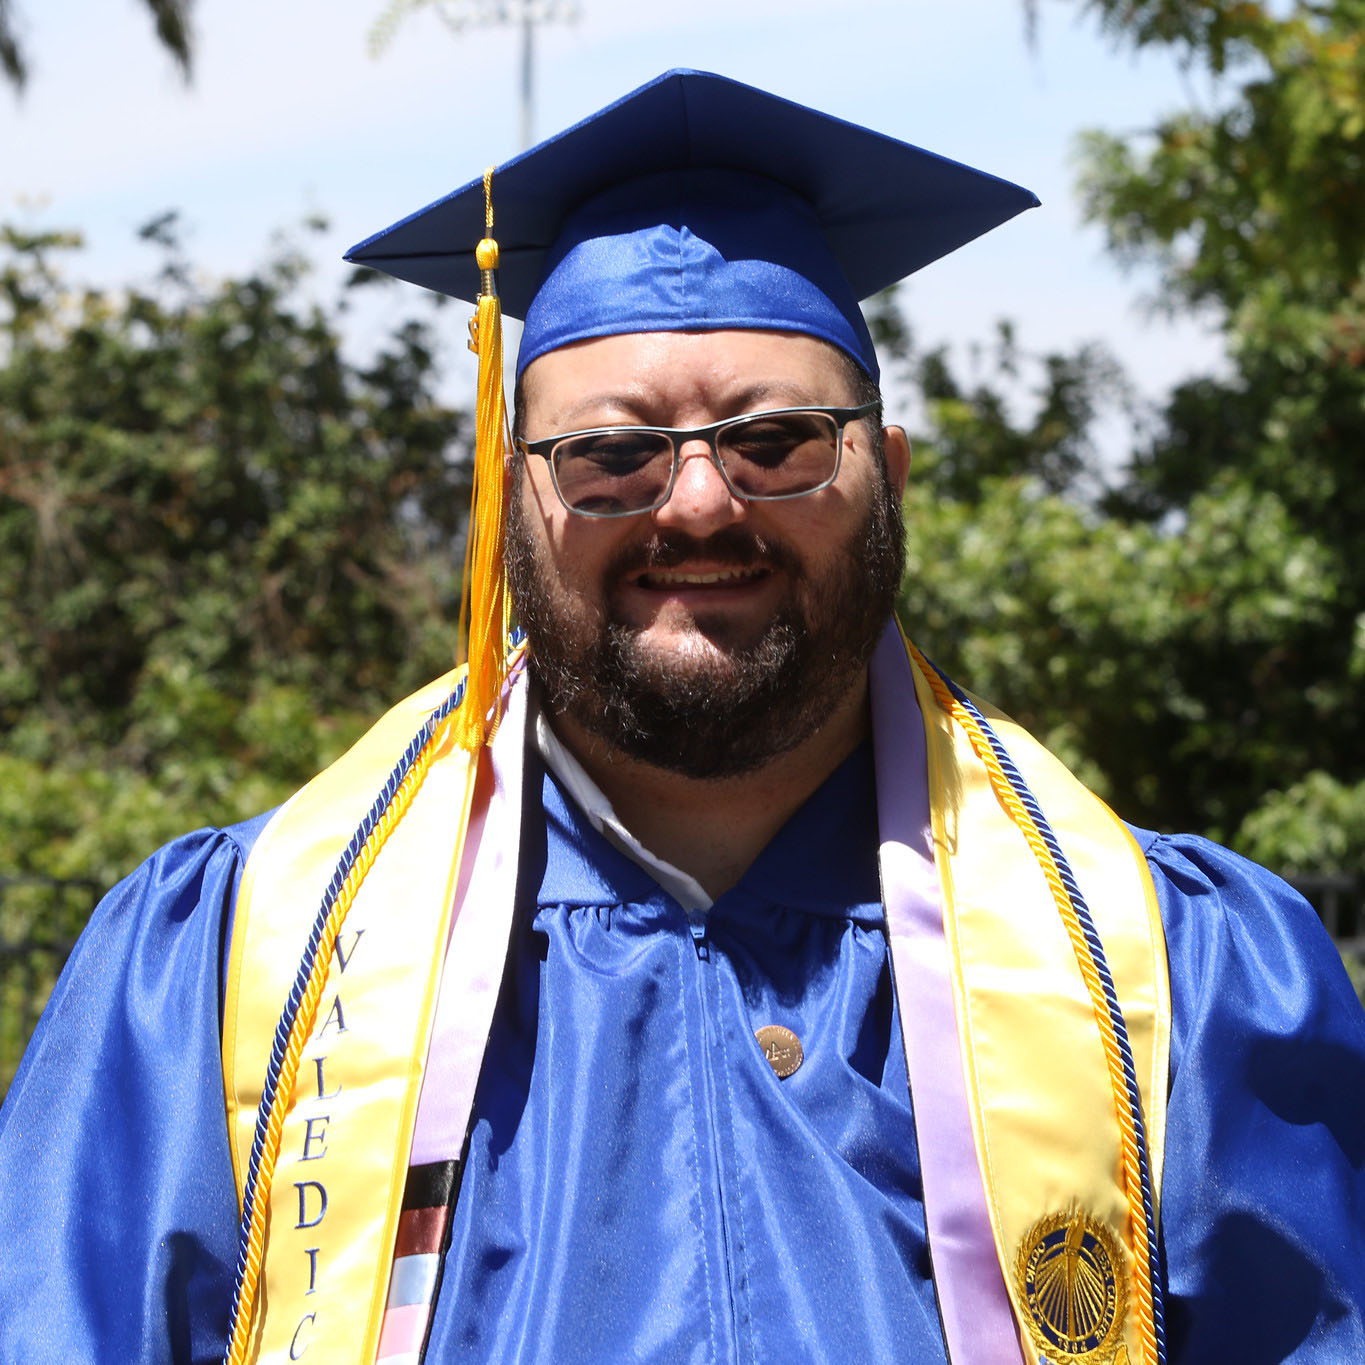 Danny Dunn is smiling and wearing glasses and blue and gold graduation attire.